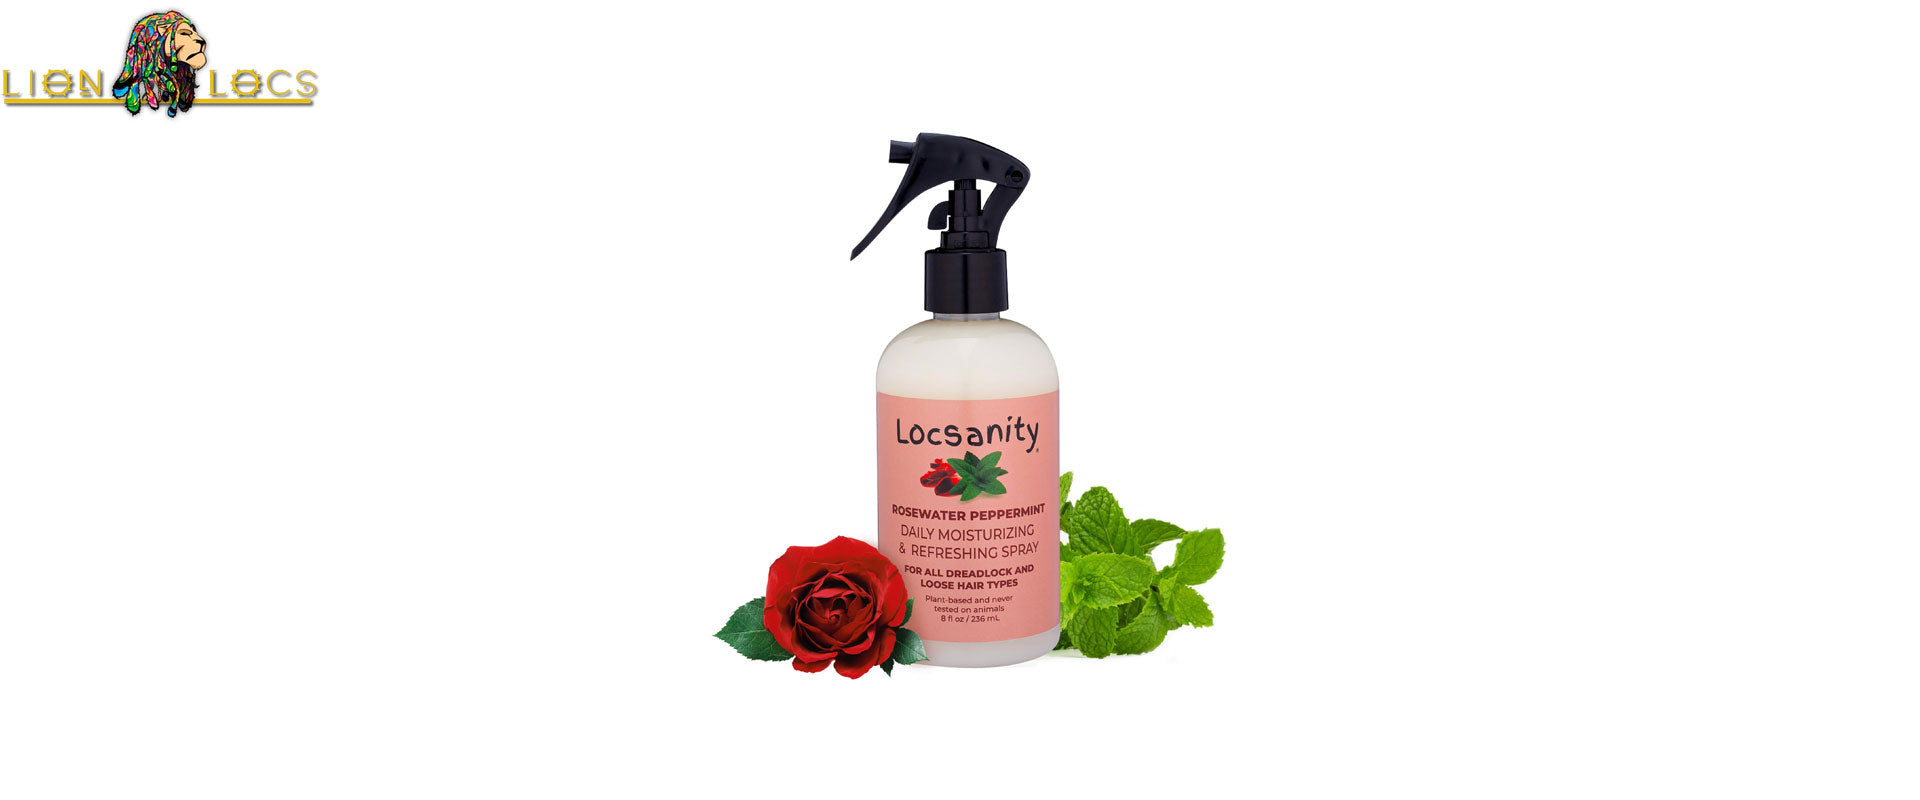 Locsanity Rosewater Peppermint Moisturizing Refreshing Spray Review